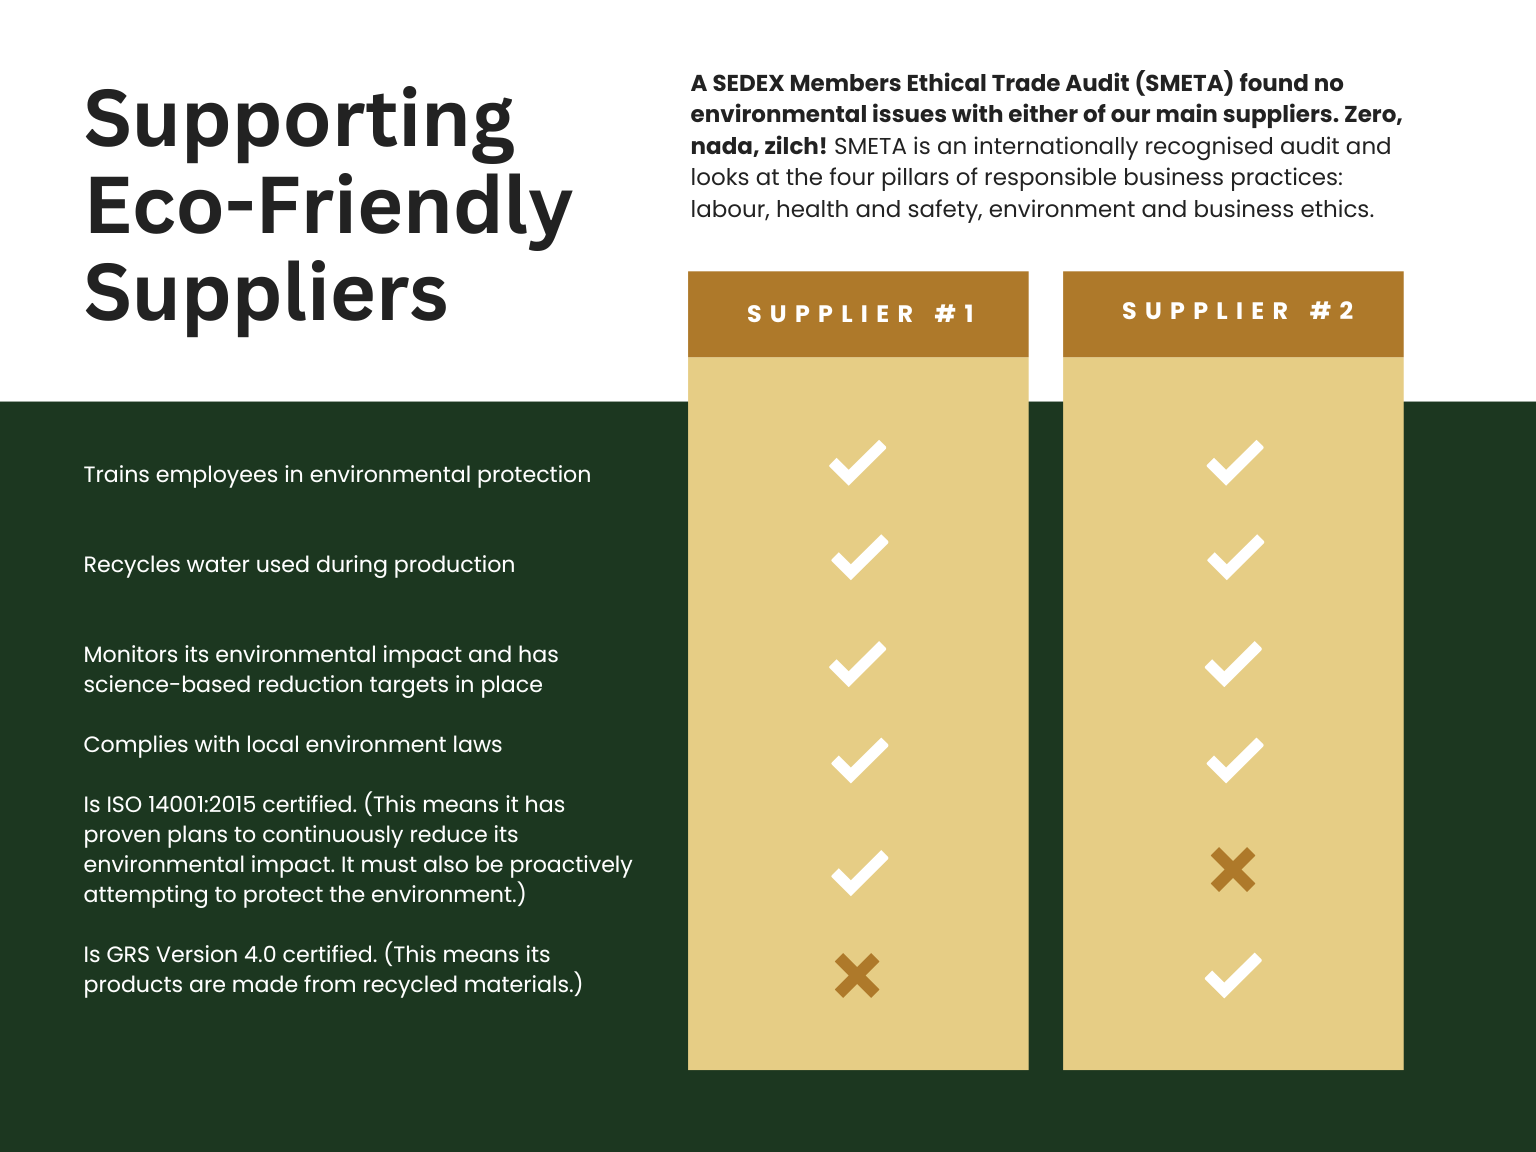 A graphic showing how eco-friendly Badges And Medals' two main suppliers are.